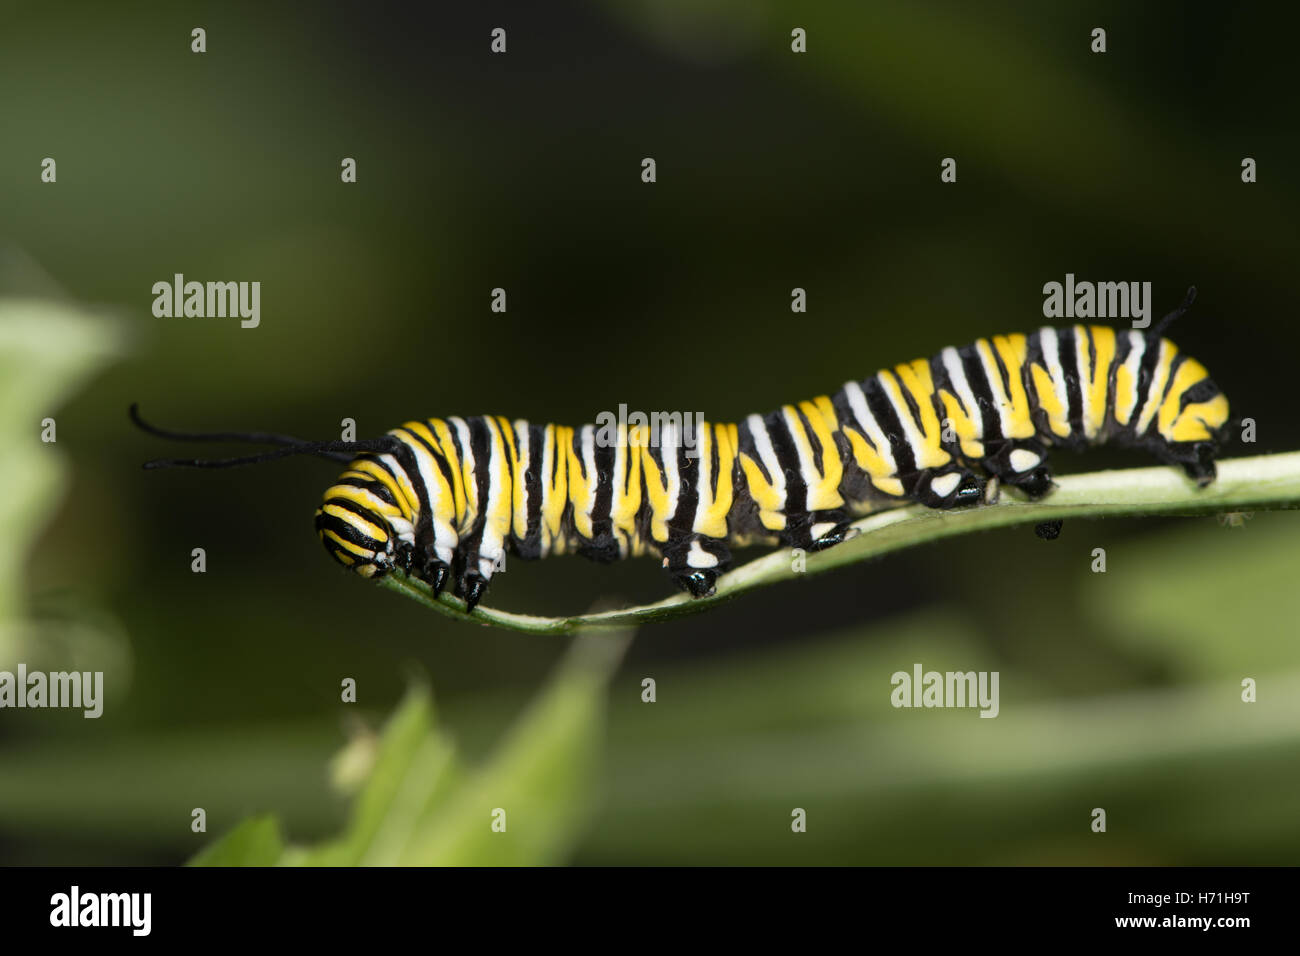 Monarch butterfly (Danaus plexippus) caterpillar. Mature larva (fifth instar) of North American butterfly in family Nymphalidae Stock Photo